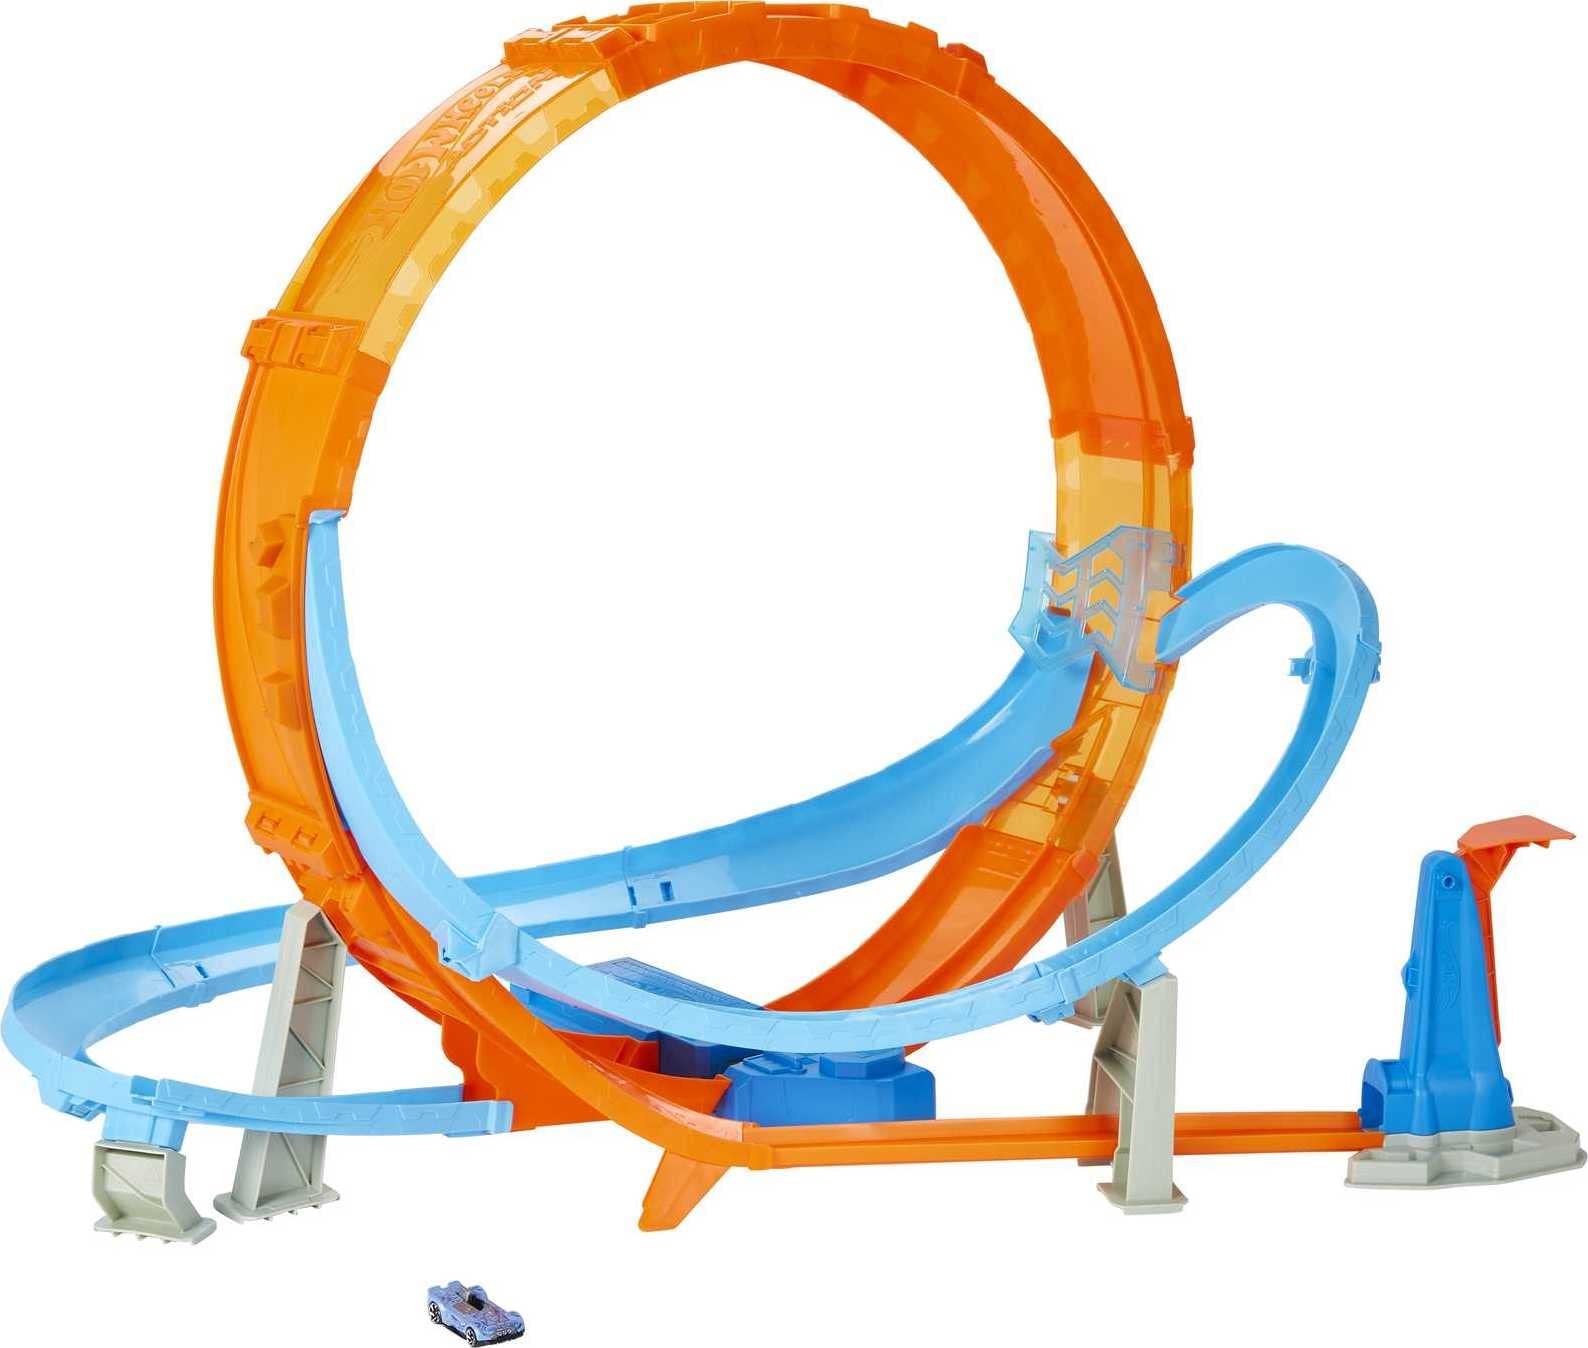 Hot Wheels Massive Loop Mayhem Track Set with Huge 28-Inch Wide Track Loop Slam Launcher, Battery Box & 1 1:64 Scale Car, Designed for Multi-Car Play, Gift for Kids 5 Years Old & Up